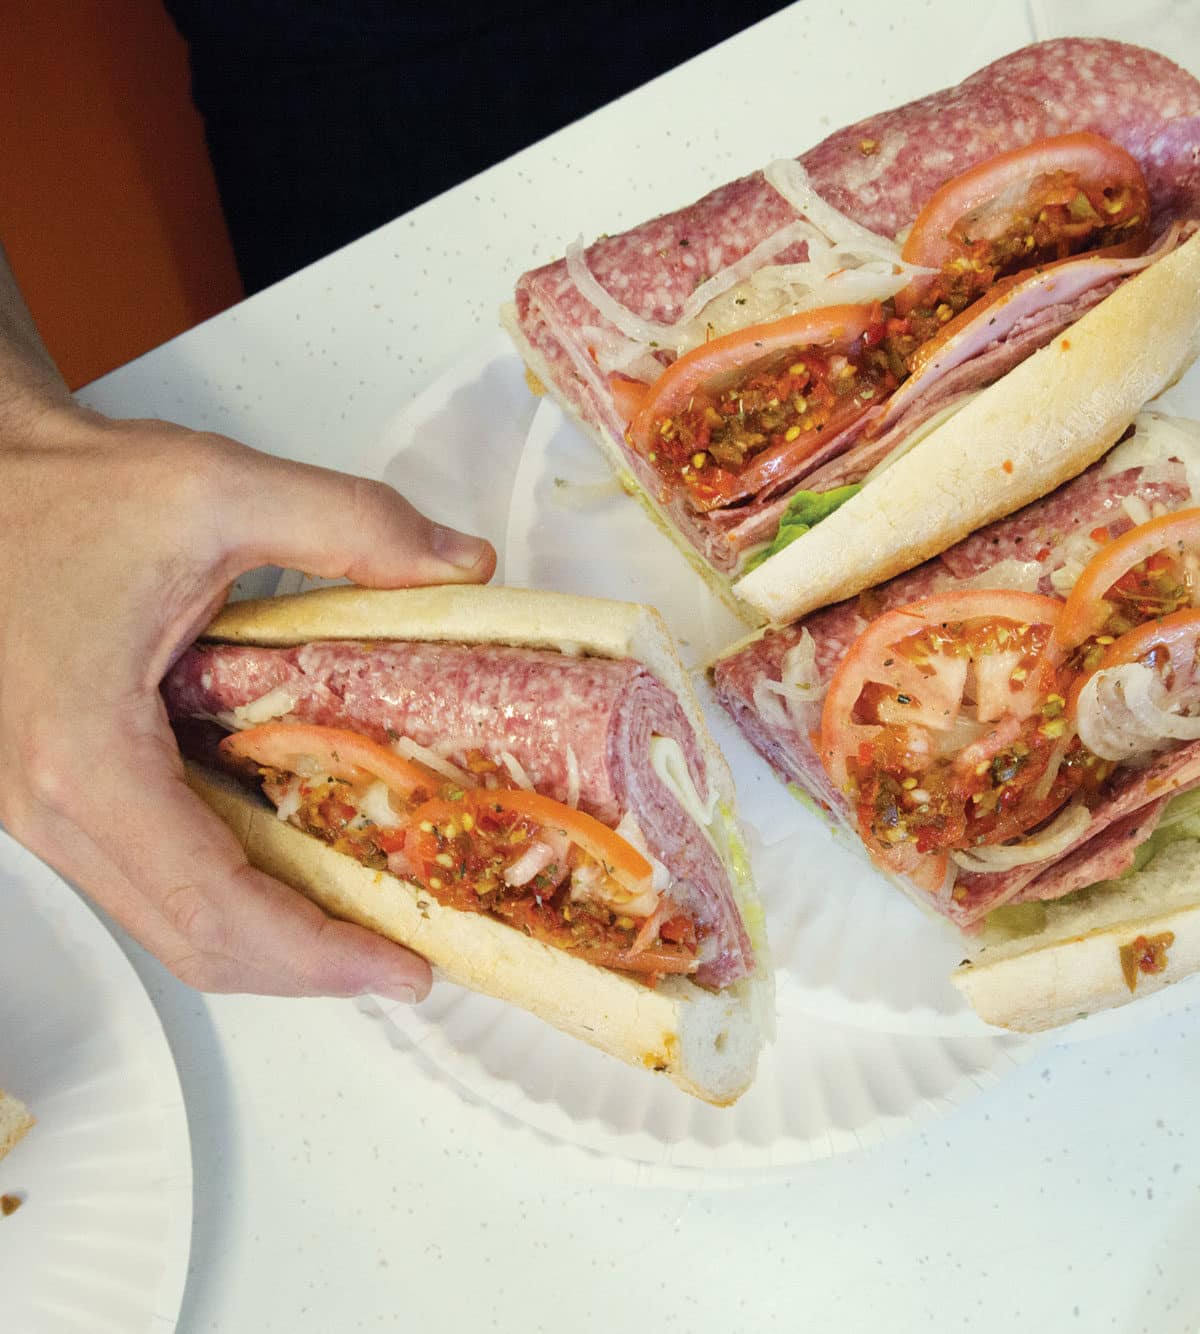 What's the Difference Between a Hero, Sub, Grinder, and Hoagie?